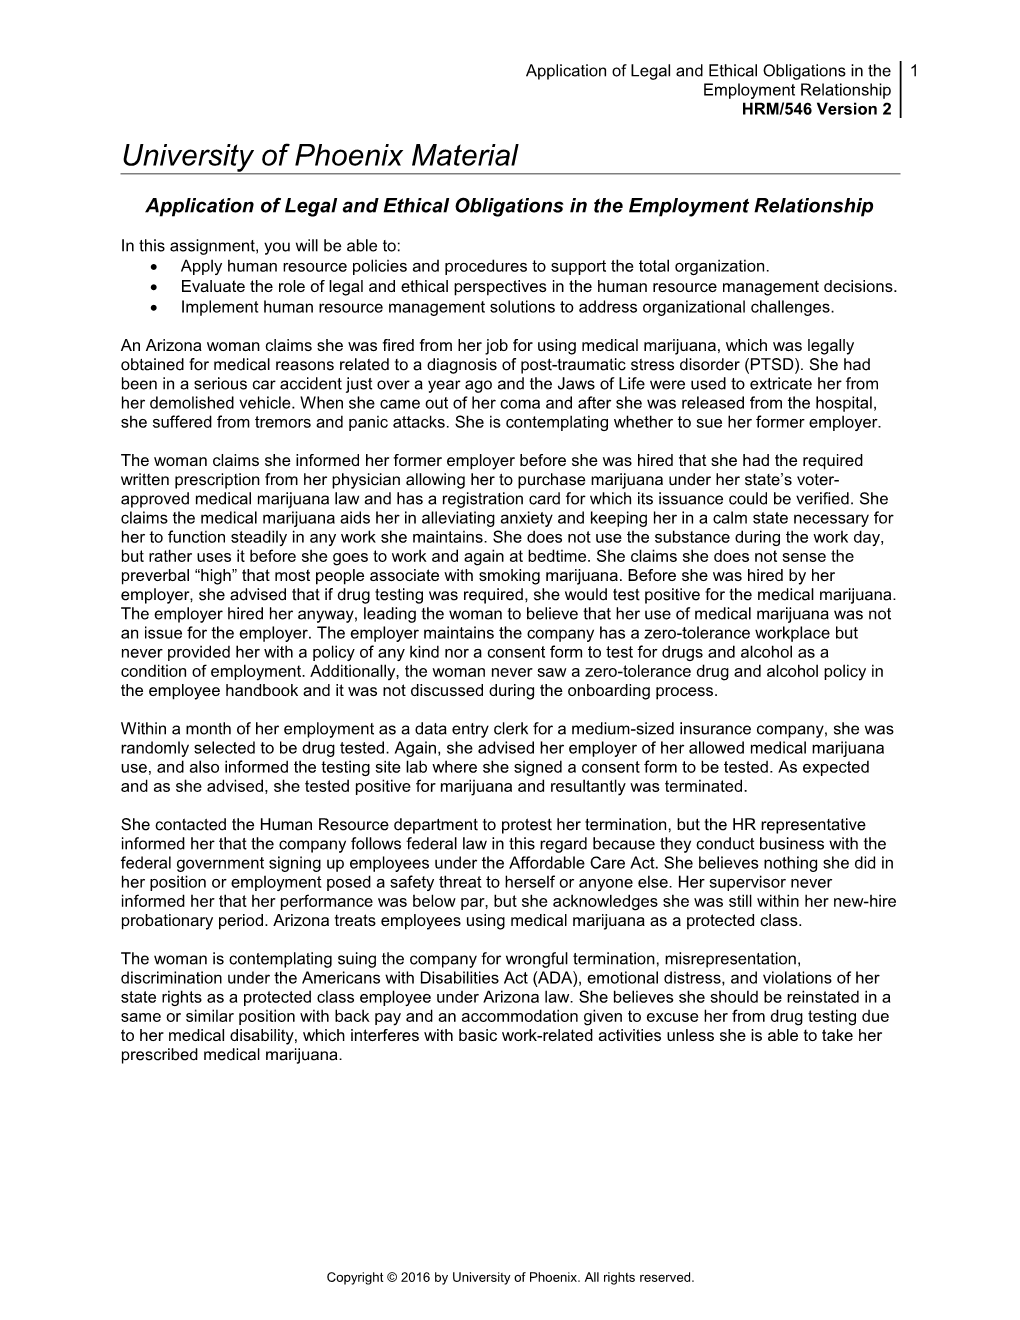 Application of Legal and Ethical Obligations in the Employment Relationship